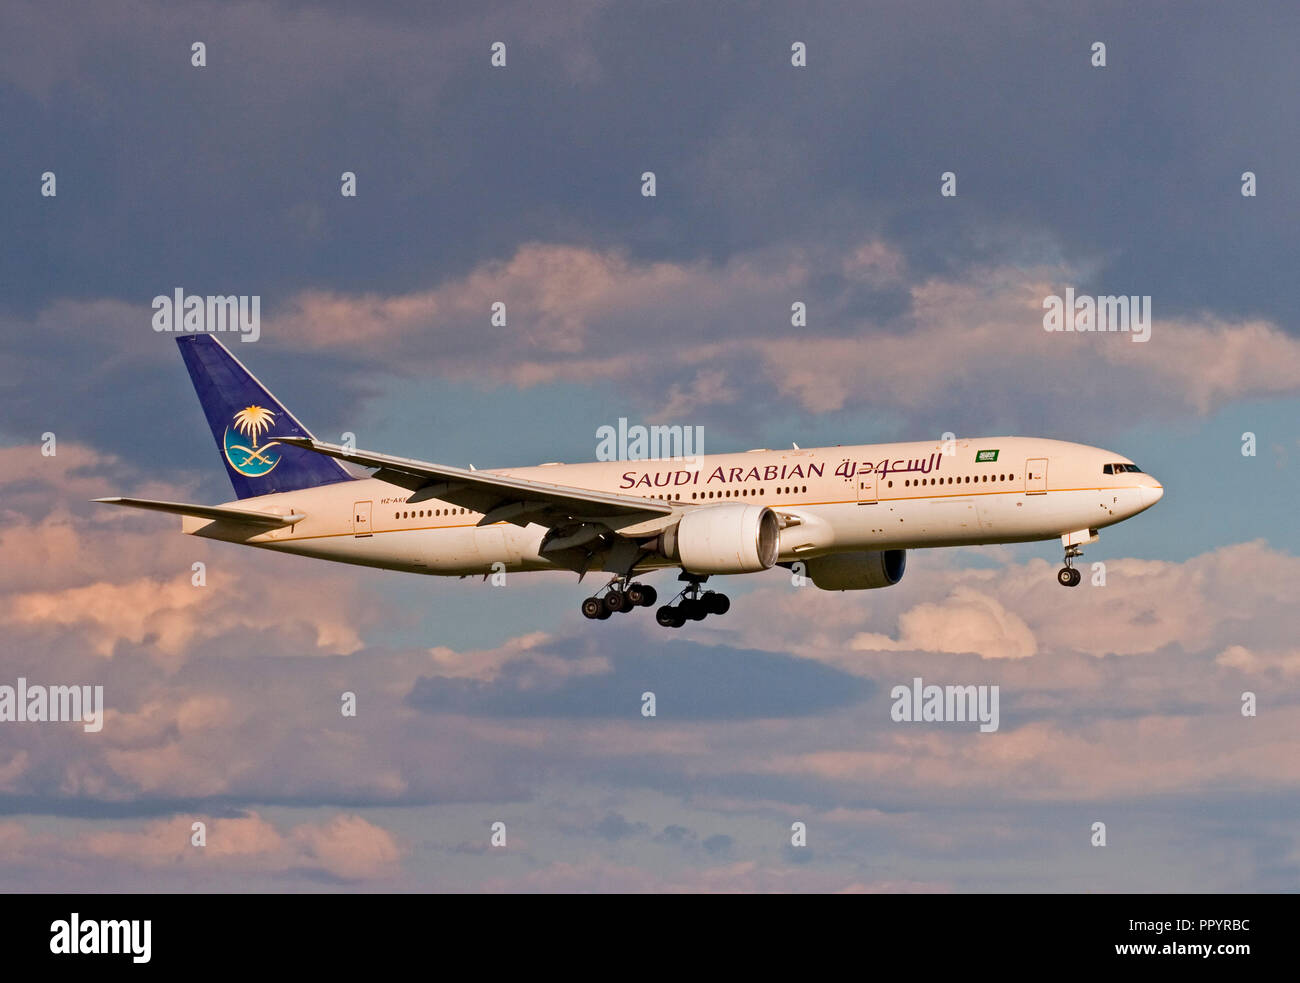 Saudi Arabian Airlines Boeing 777-268ER landing at London Stansted airport. Stock Photo